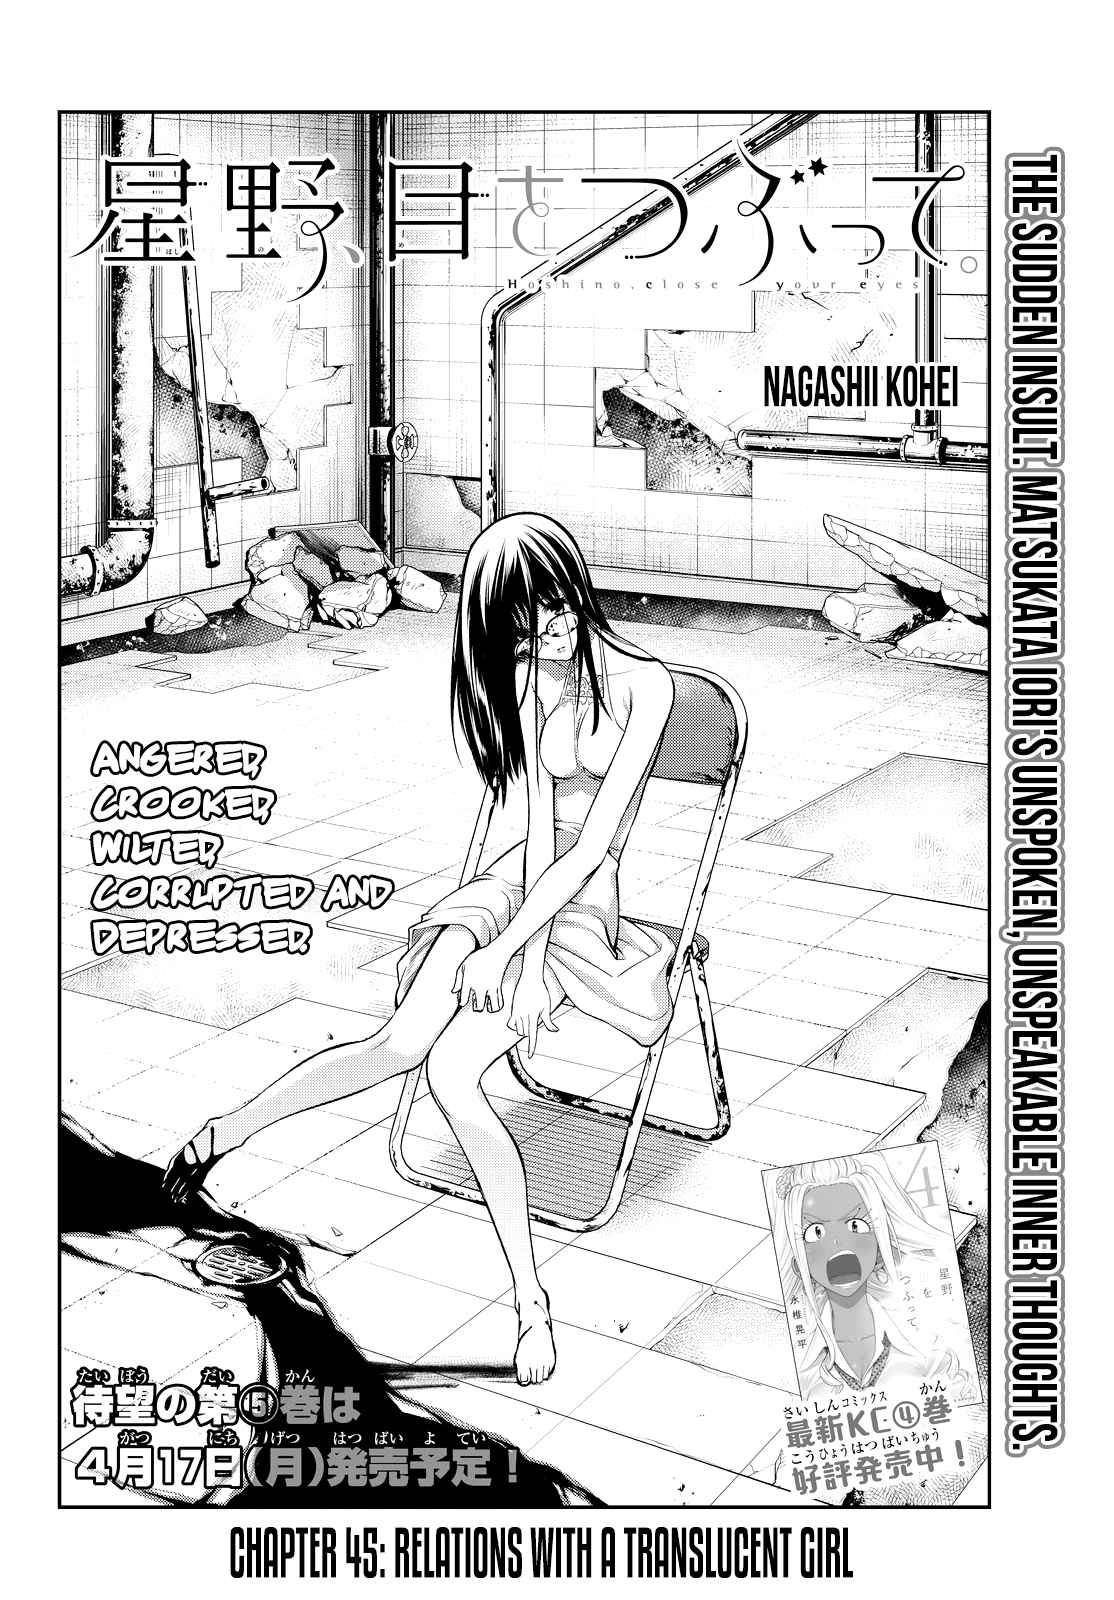 Hoshino, Me O Tsubutte Vol. 6 Ch. 45 Relations With a Translucent Girl